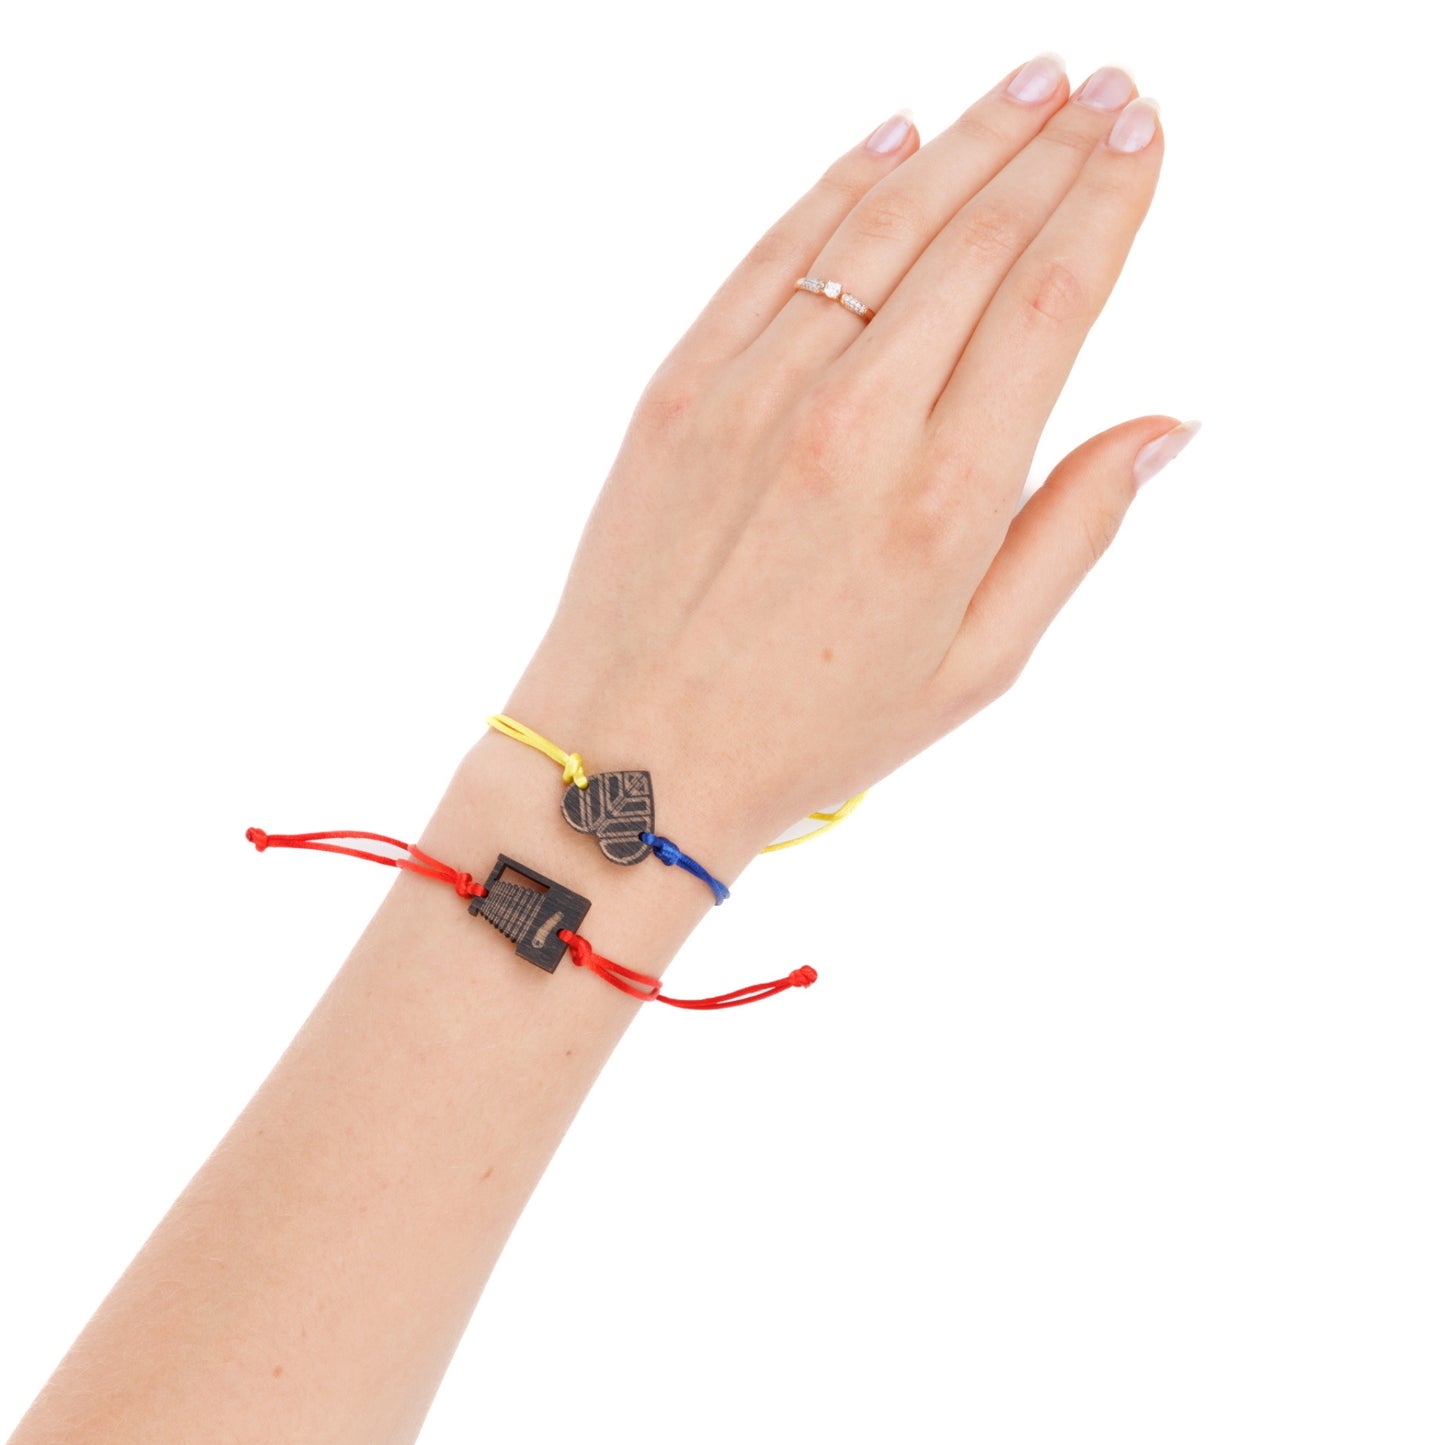 A hand adorned with two colorful bracelets. One bracelet 'Love cameras,' and the other 'Peace for Ukraine.' The hand is against a white background